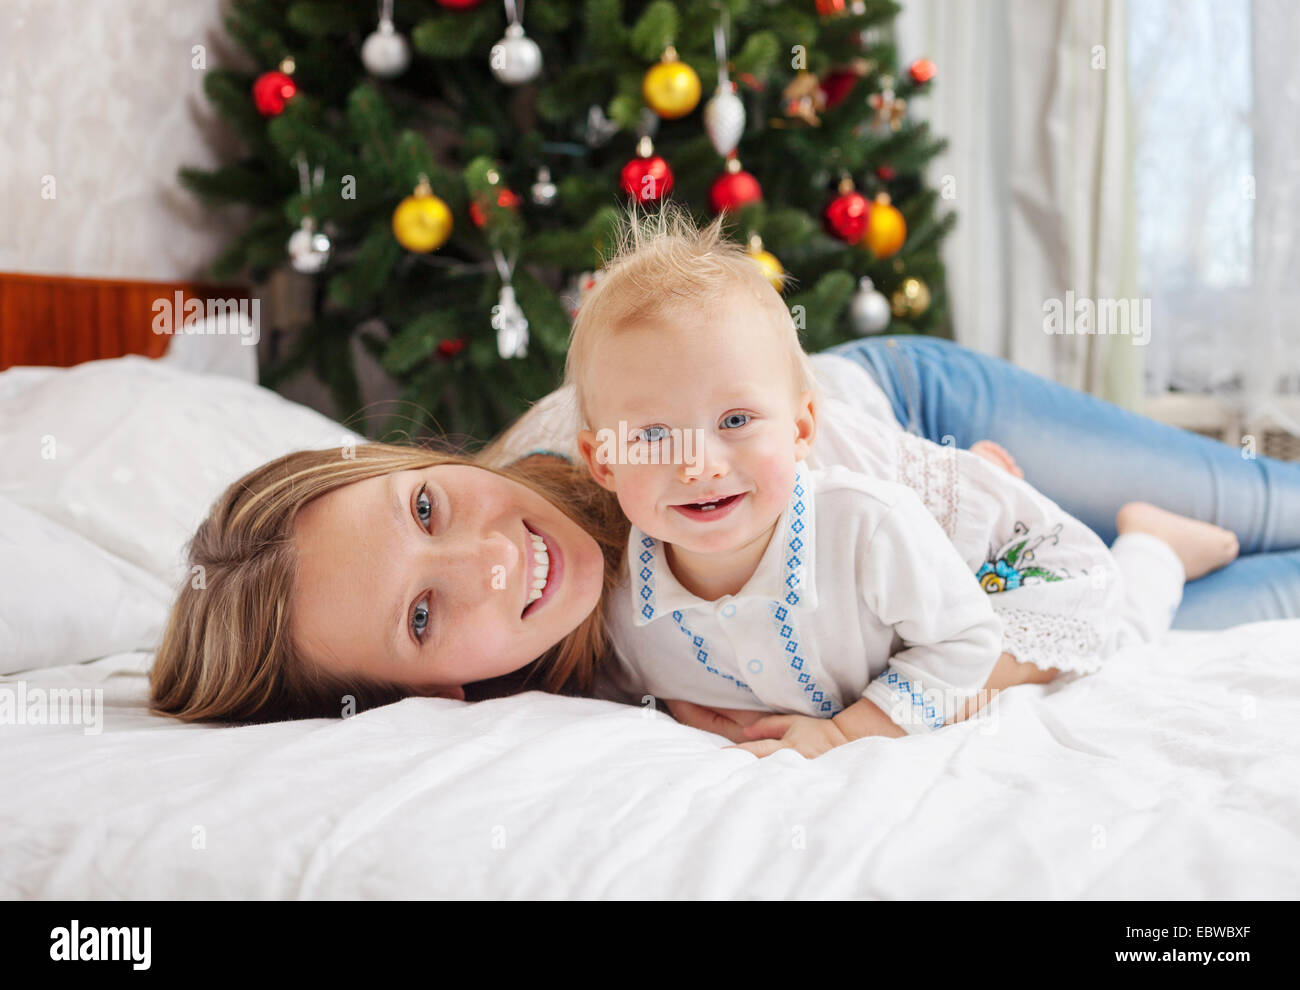 Portrait of happy mother and baby boy on bed at home with decorated Christmas tree in background Stock Photo